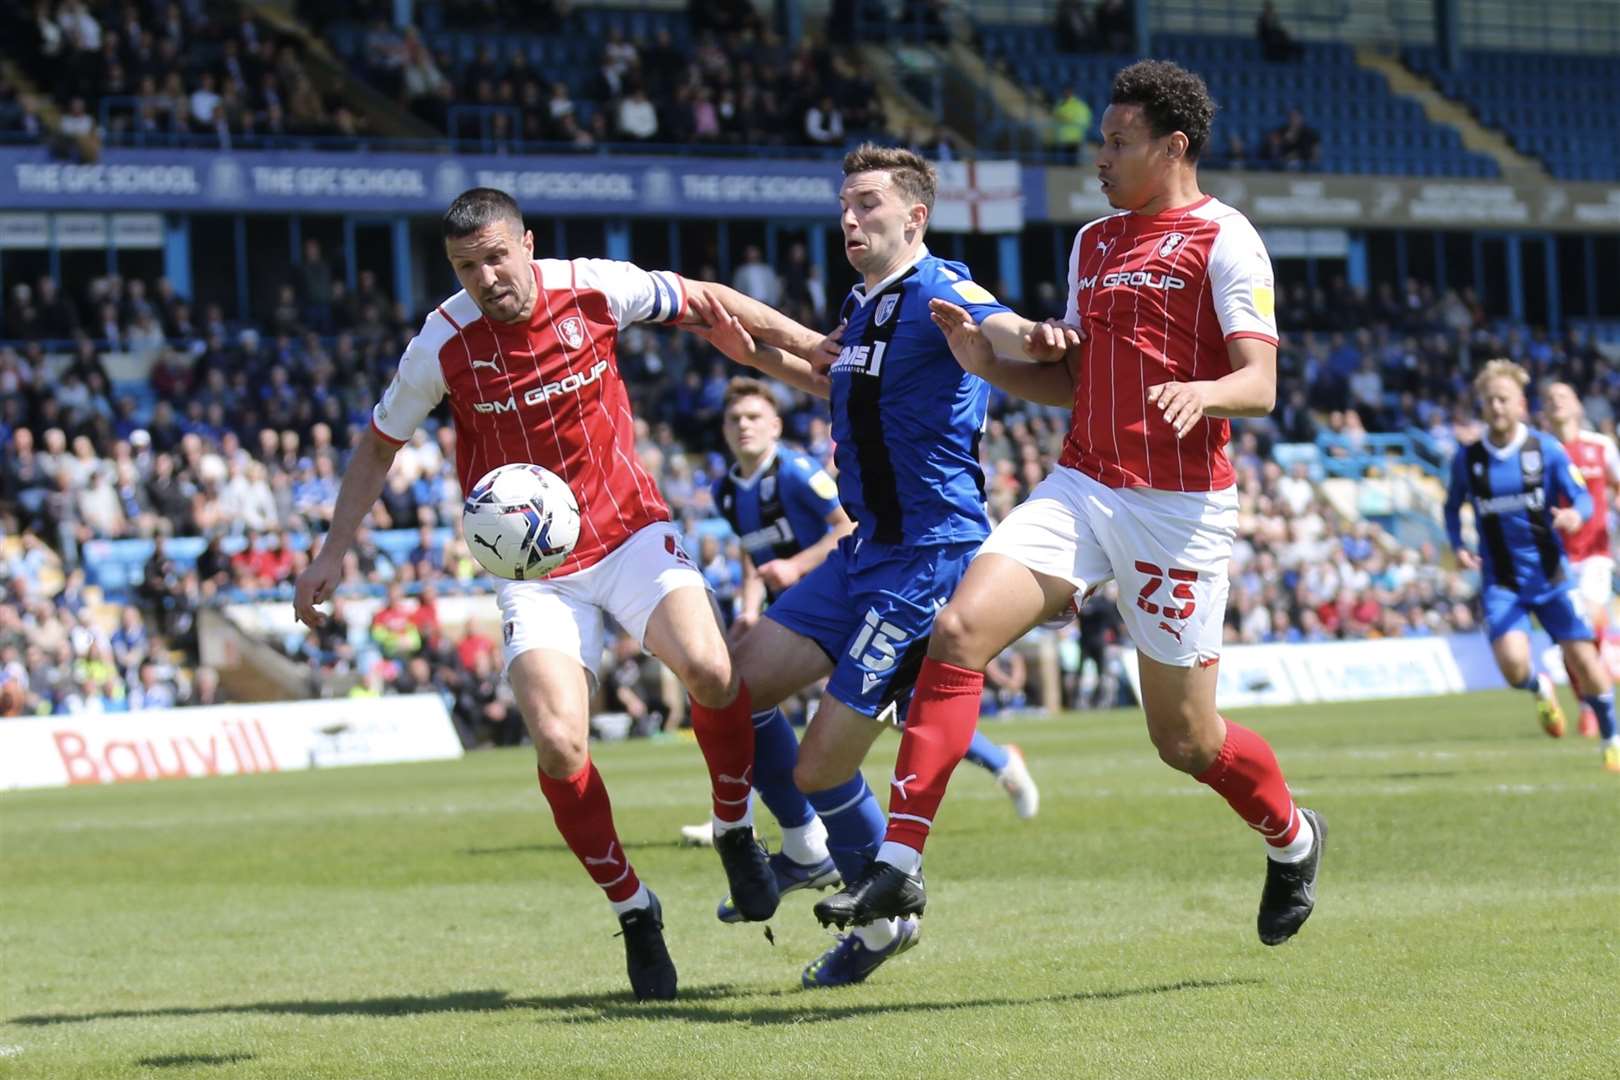 Action between Gillingham and Rotherham United Picture: KPI (56383516)